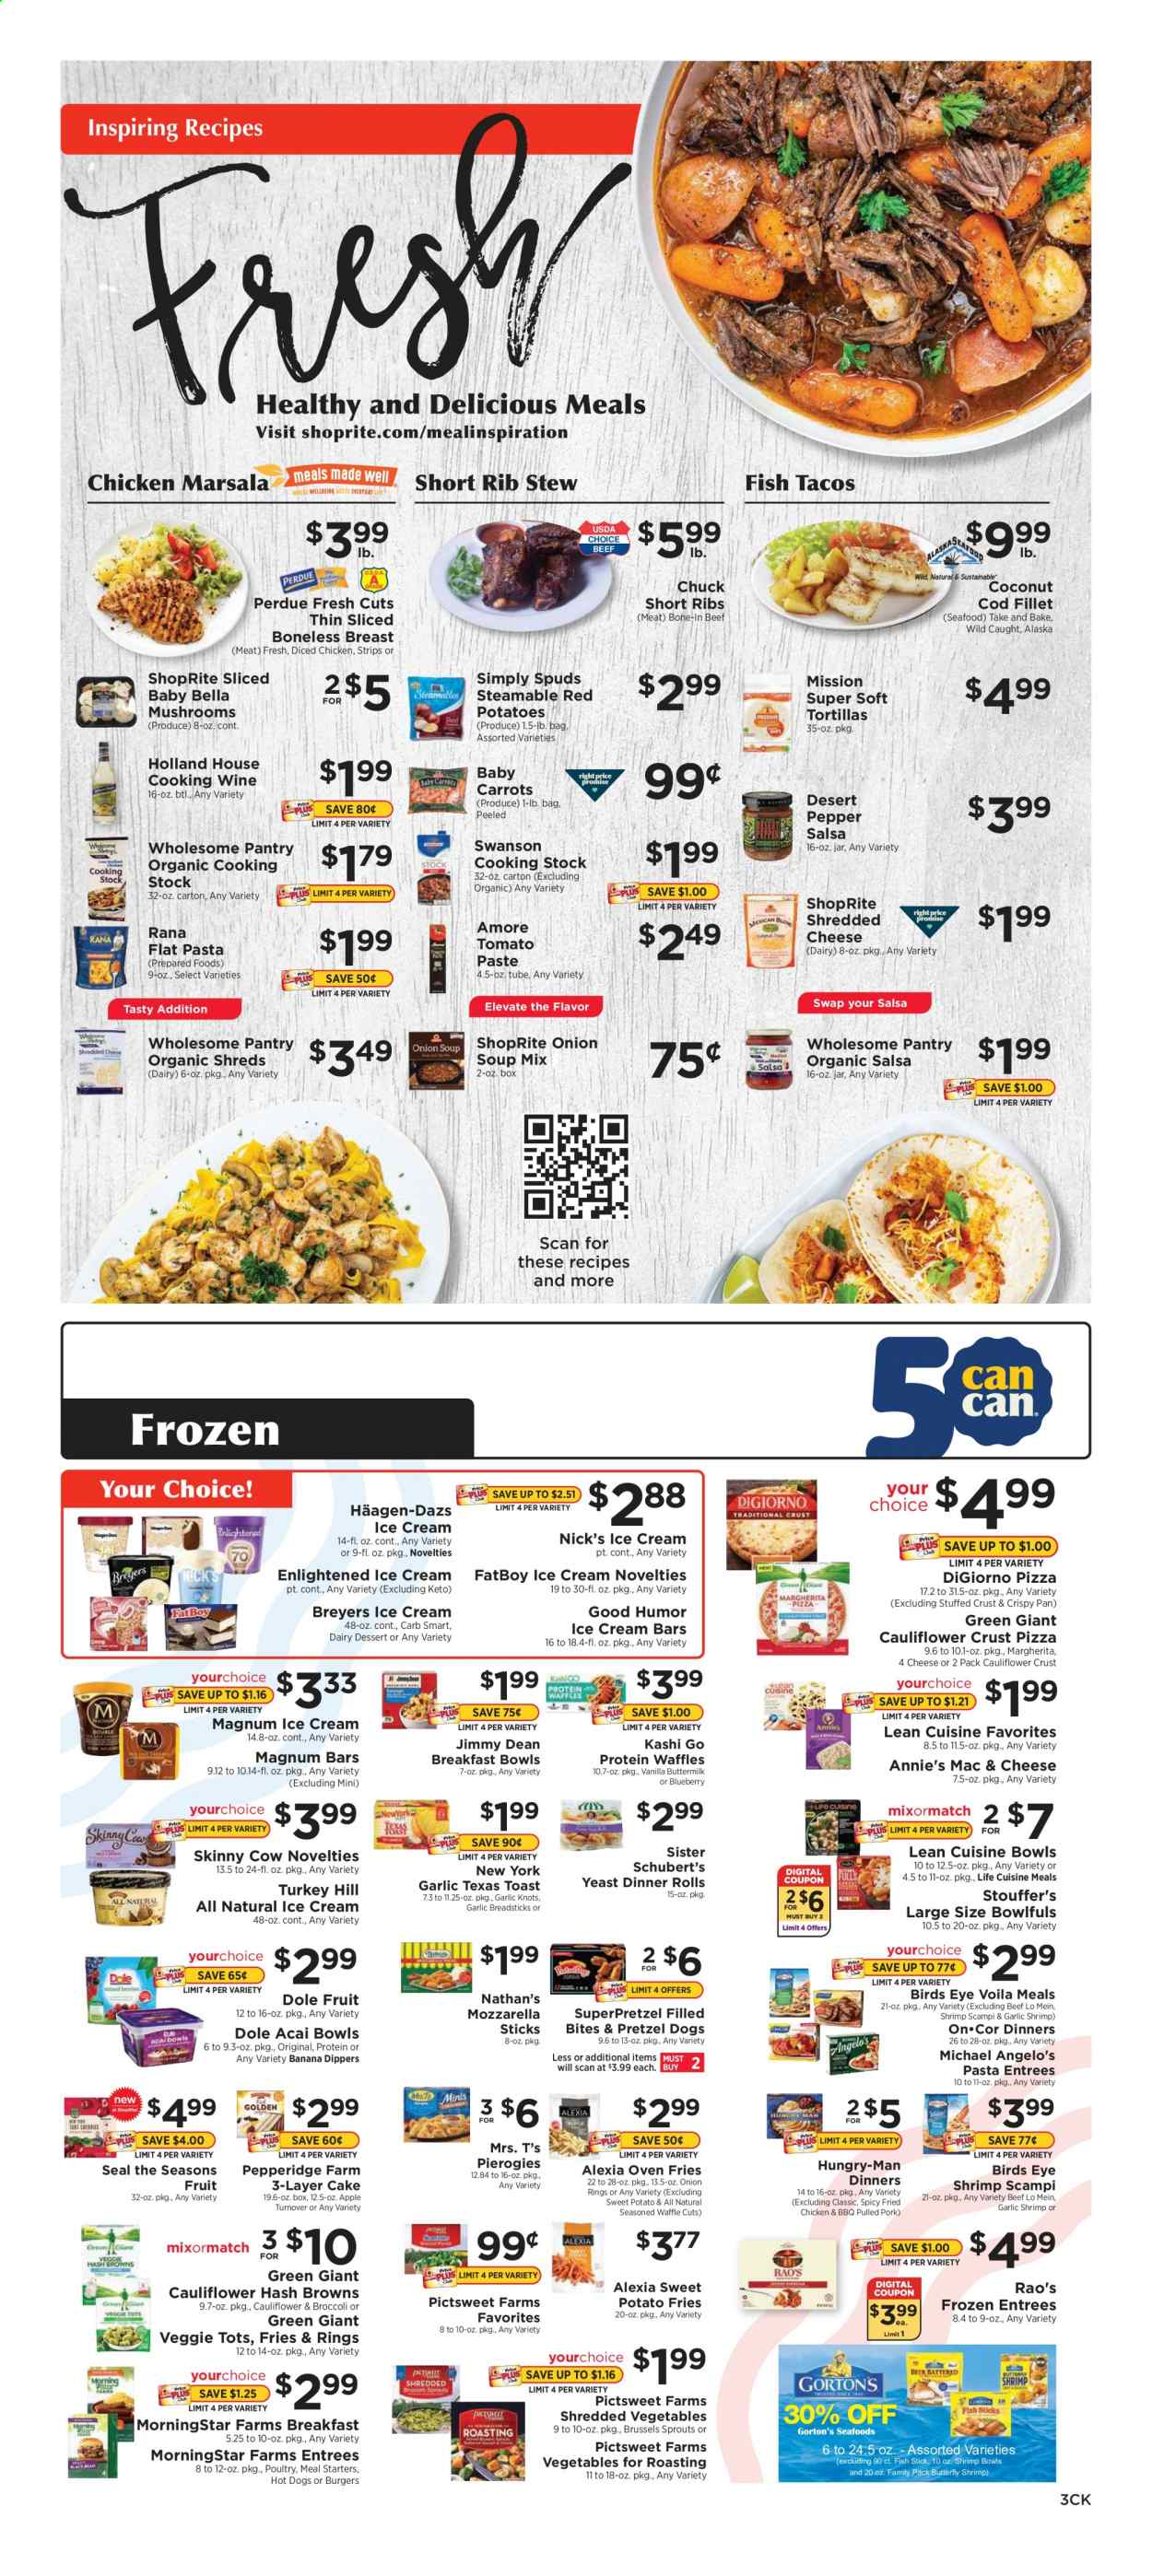 thumbnail - ShopRite Flyer - 01/17/2021 - 01/23/2021 - Sales products - mushrooms, Dole, bread sticks, tortillas, pretzels, dinner rolls, toast bread, tacos, turnovers, cake, coconut, cod, seafood, fish, shrimps, macaroni & cheese, hash browns, hot dog, pizza, onion soup, onion rings, soup mix, soup, hamburger, fried chicken, breakfast bowl, Bird's Eye, MorningStar Farms, Lean Cuisine, Giovanni Rana, Perdue®, Annie's, Jimmy Dean, mozzarella, shredded cheese, buttermilk, yeast, salsa, ice cream, ice cream bars, Häagen-Dazs, Nick's Ice Cream, Enlightened lce Cream, carrots, sweet potato, brussel sprouts, strips, potato fries, SuperPretzel, tomato paste, pasta, Rana, pepper, cooking wine, wine, Marsala, pork meat, pulled pork, Bella, pan. Page 3.